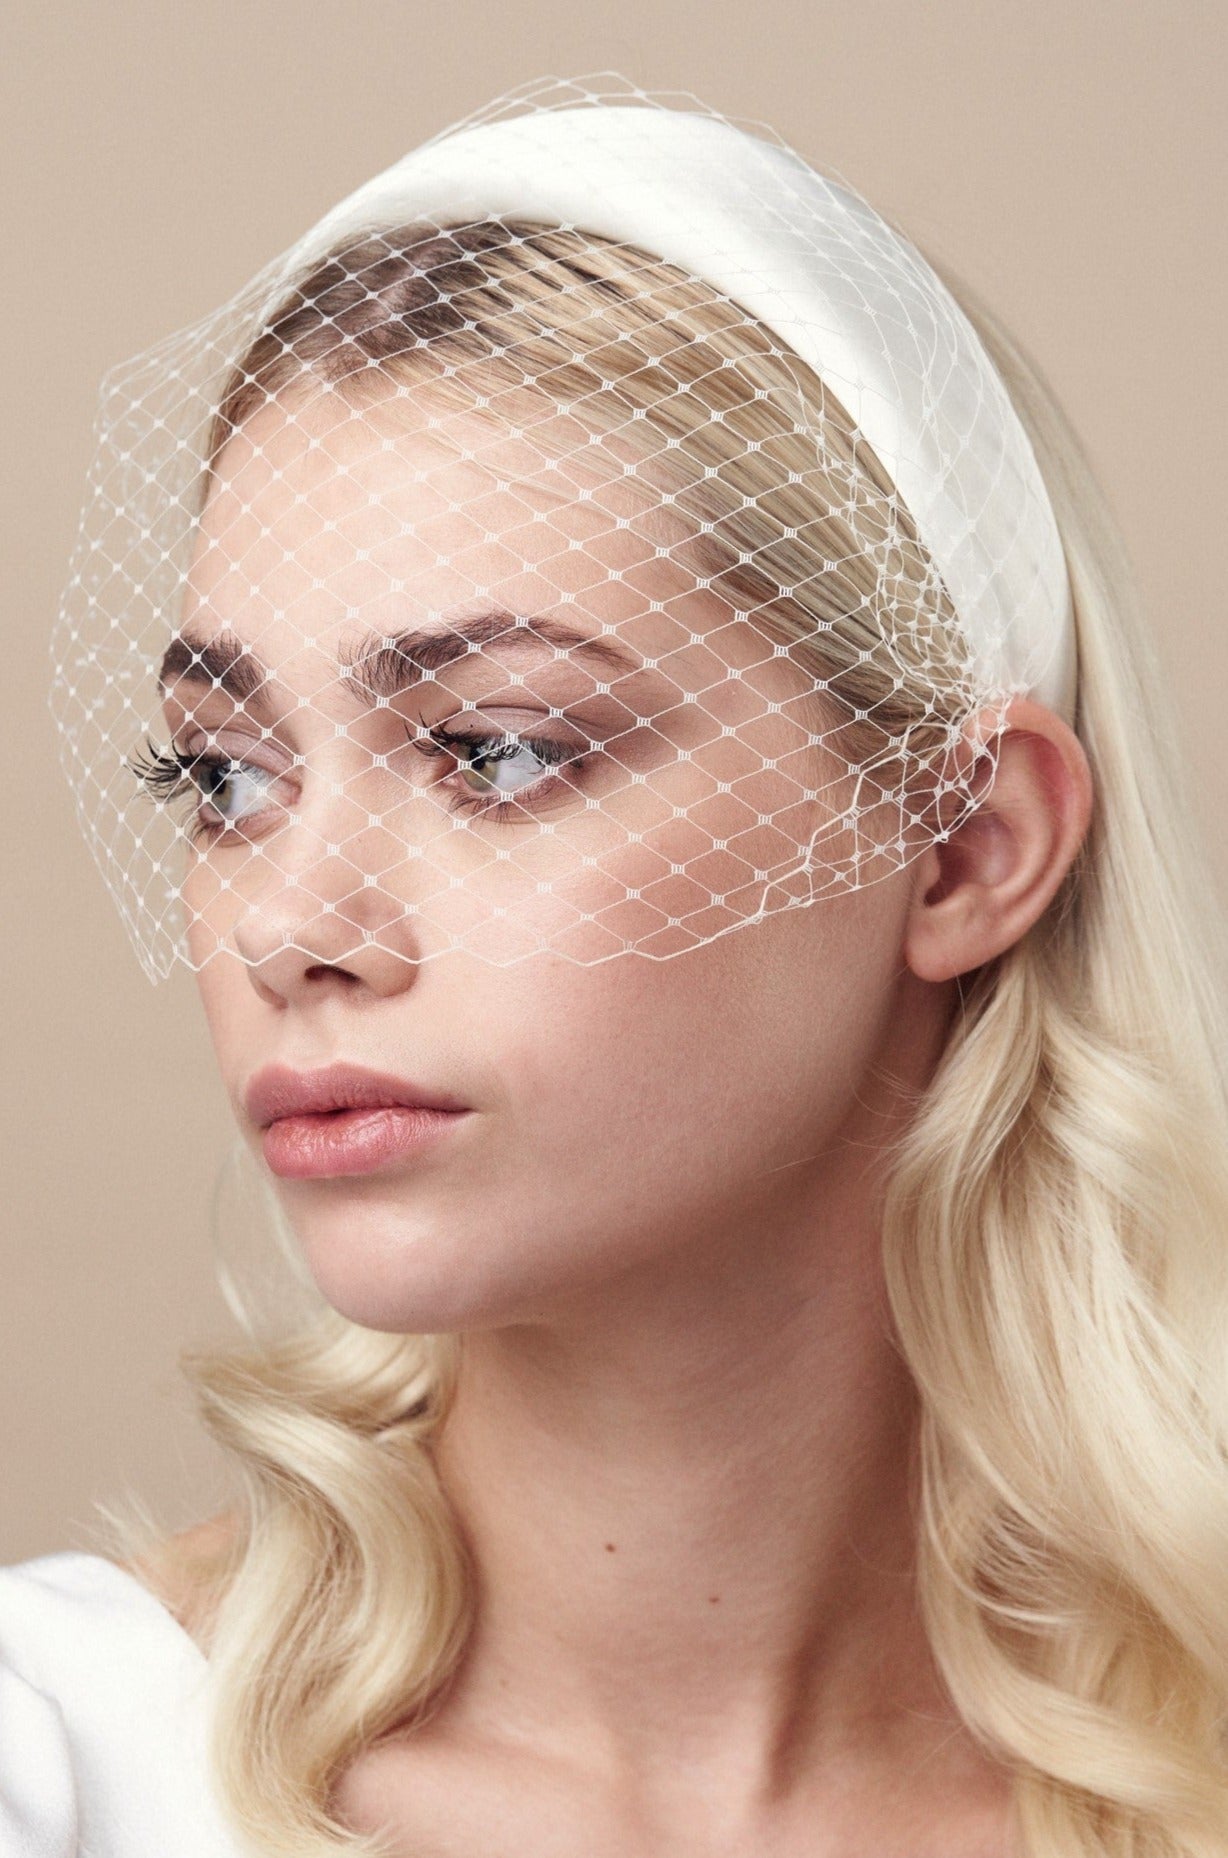 Ivory padded headband with adjustable birdcage veil attached worn above the mouth